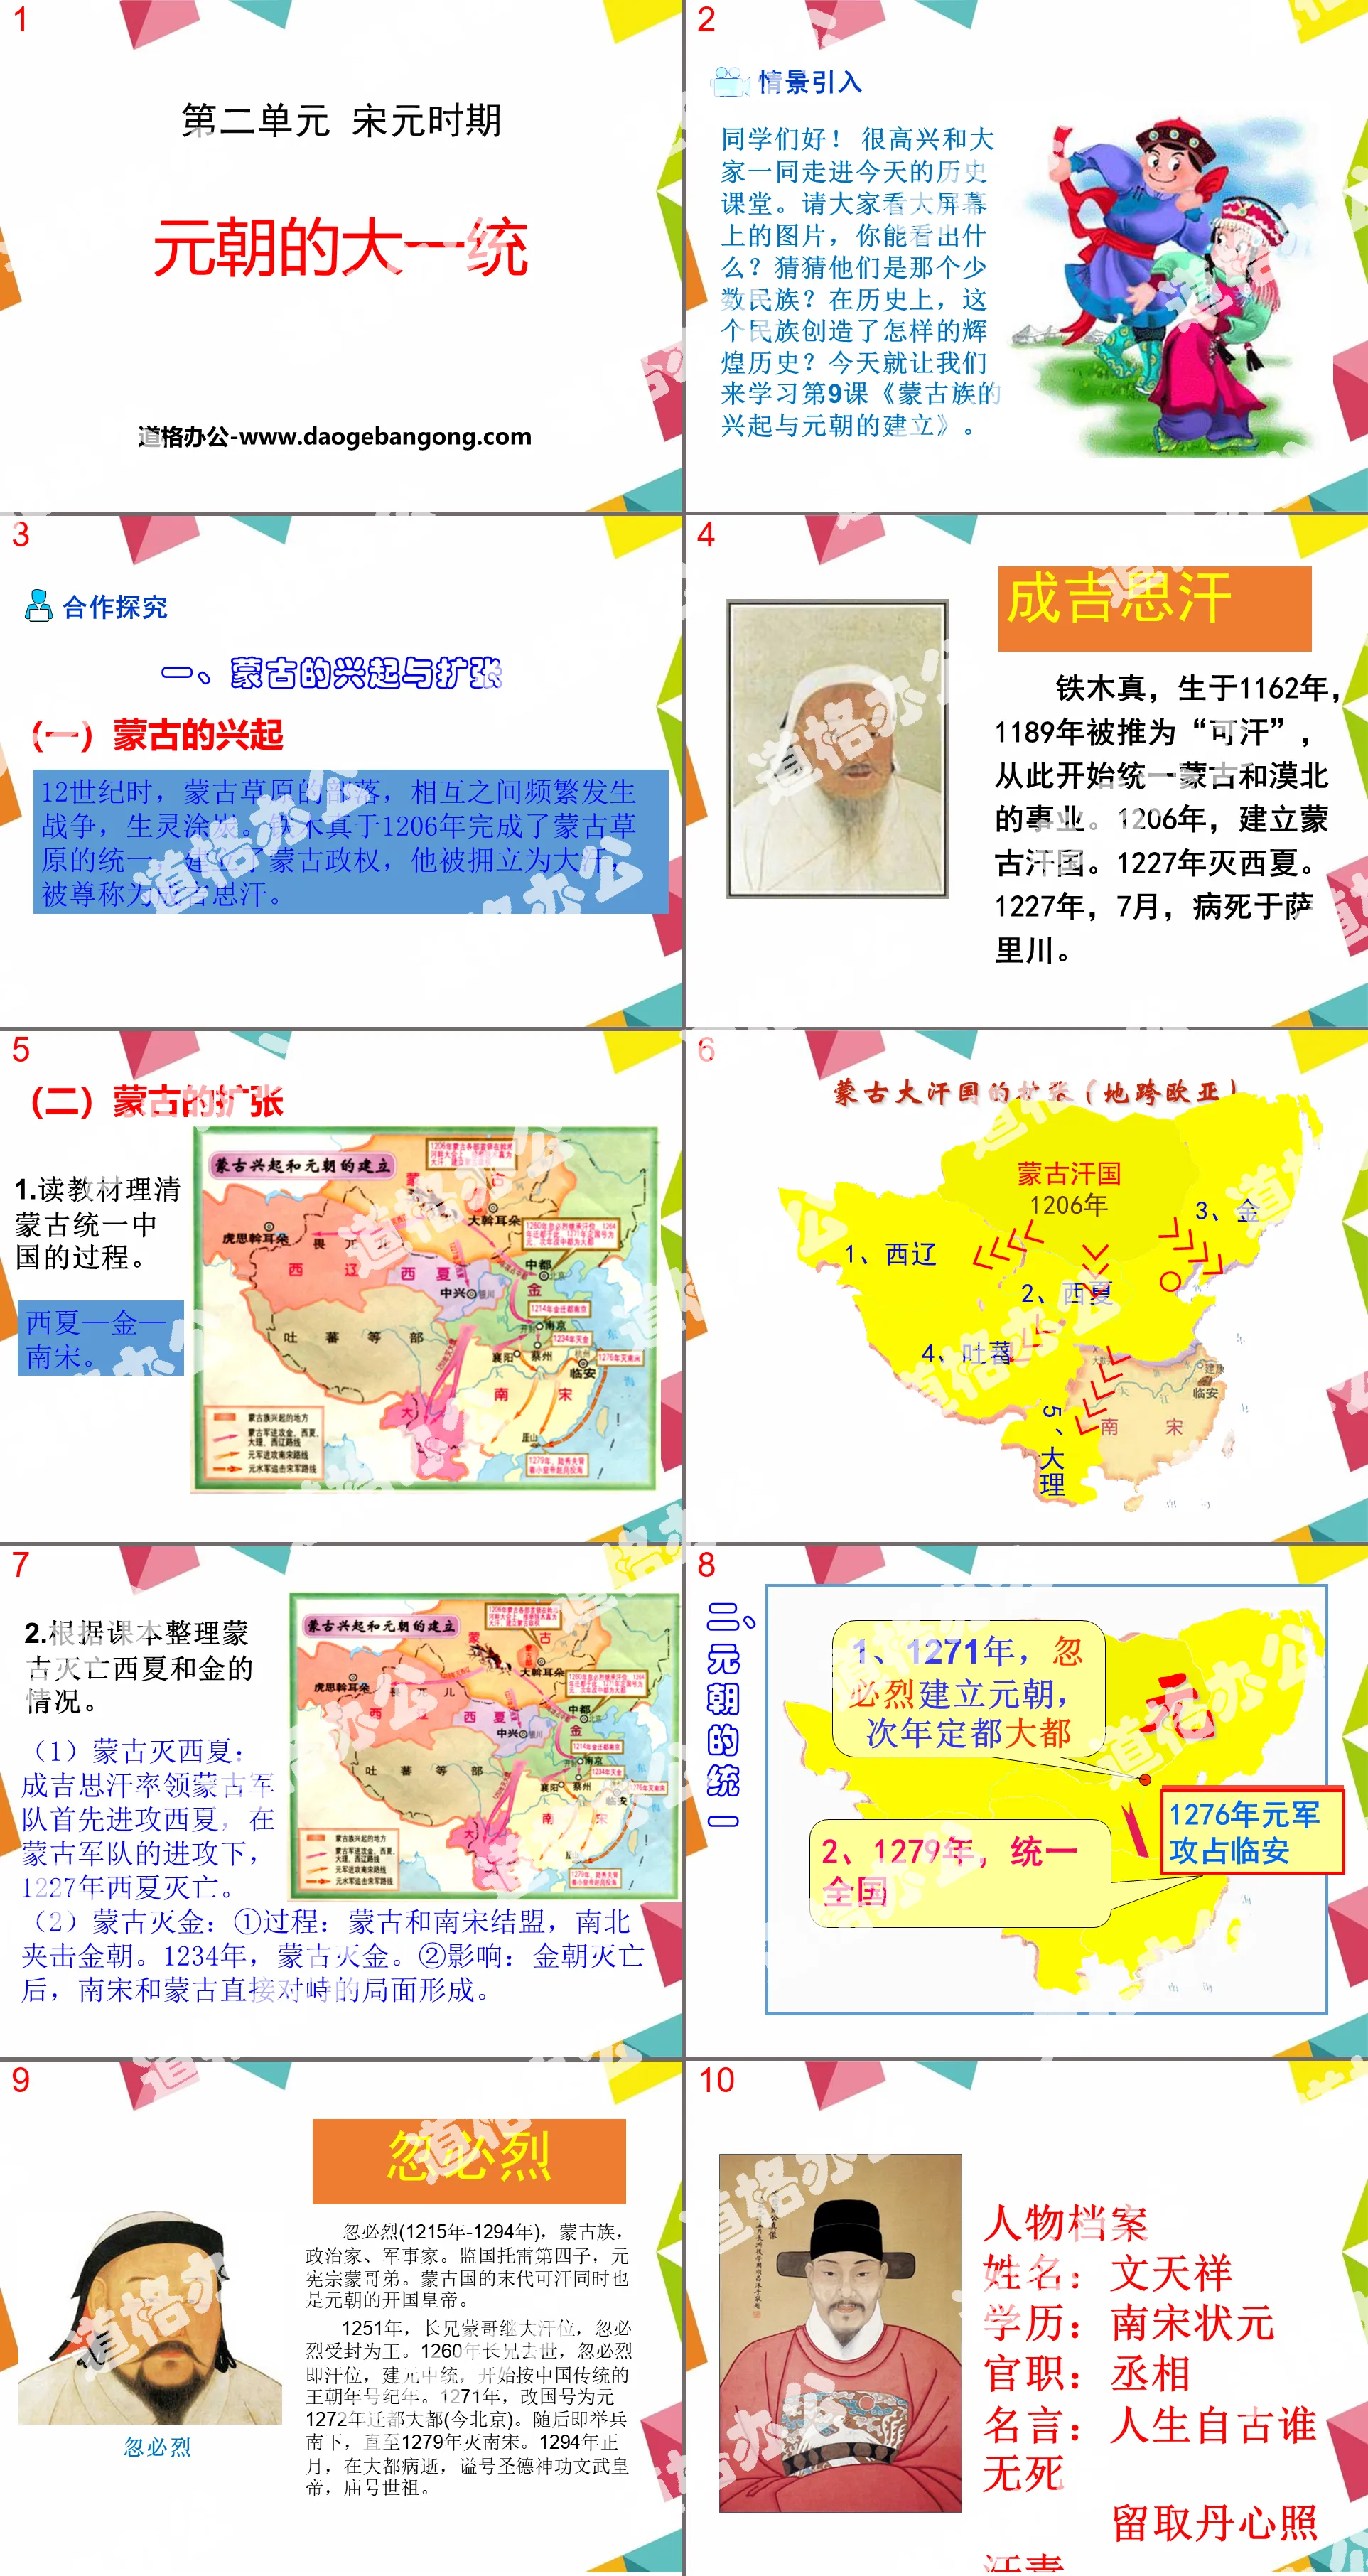 "The Unification of the Yuan Dynasty" PPT courseware 2 during the Song and Yuan Dynasties